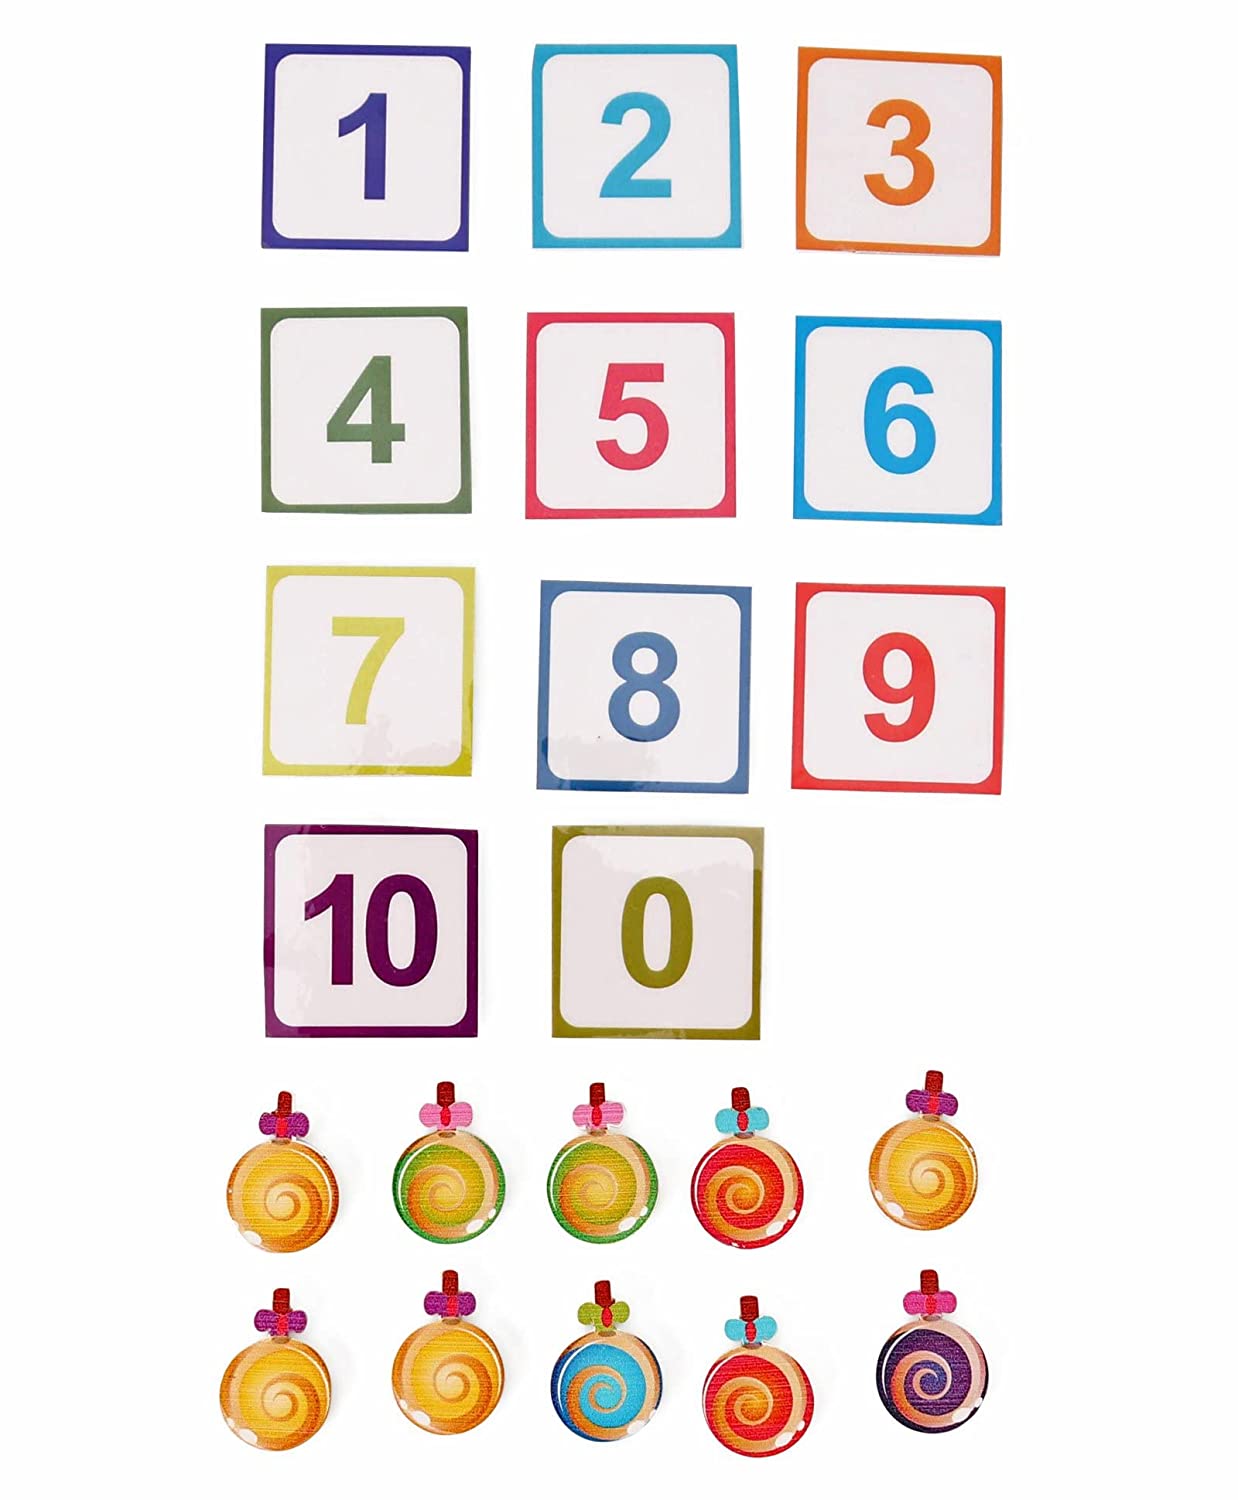 Spelling Books For Kids, Number Name Spellings All In One Bundle Activity Game